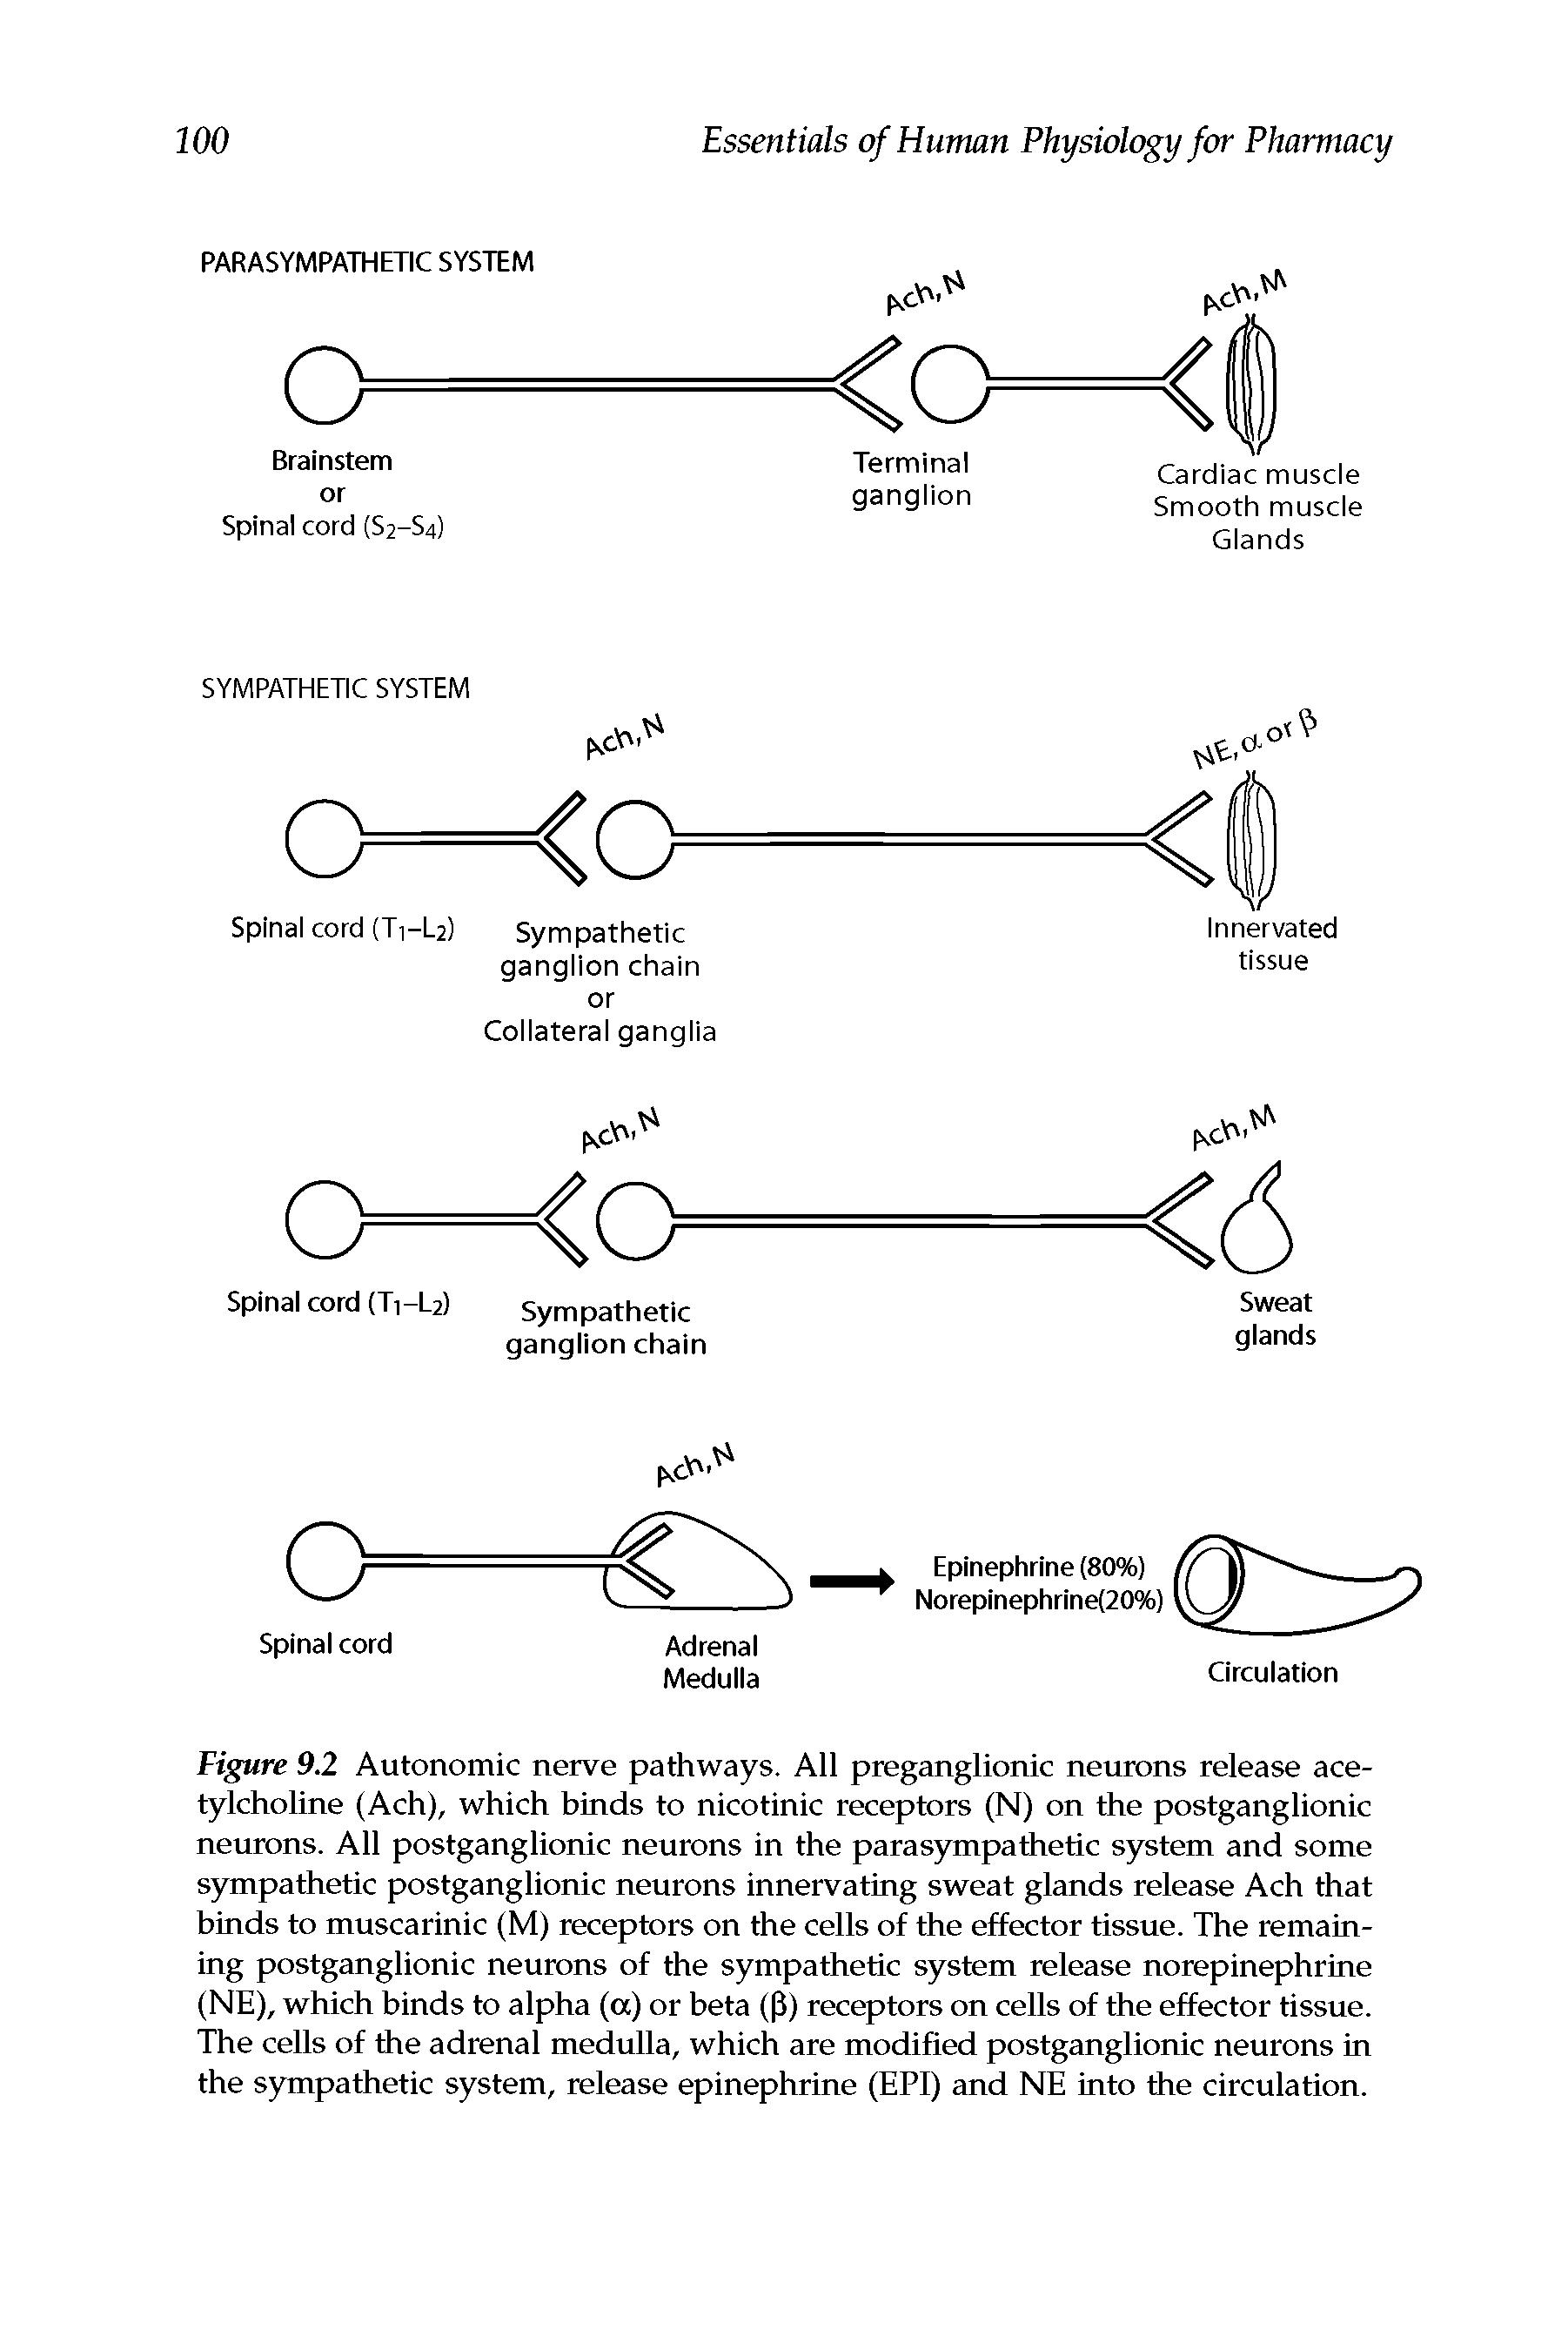 Figure 9.2 Autonomic nerve pathways. All preganglionic neurons release acetylcholine (Ach), which binds to nicotinic receptors (N) on the postganglionic neurons. All postganglionic neurons in the parasympathetic system and some sympathetic postganglionic neurons innervating sweat glands release Ach that binds to muscarinic (M) receptors on the cells of the effector tissue. The remaining postganglionic neurons of the sympathetic system release norepinephrine (NE), which binds to alpha (a) or beta (P) receptors on cells of the effector tissue. The cells of the adrenal medulla, which are modified postganglionic neurons in the sympathetic system, release epinephrine (EPI) and NE into the circulation.